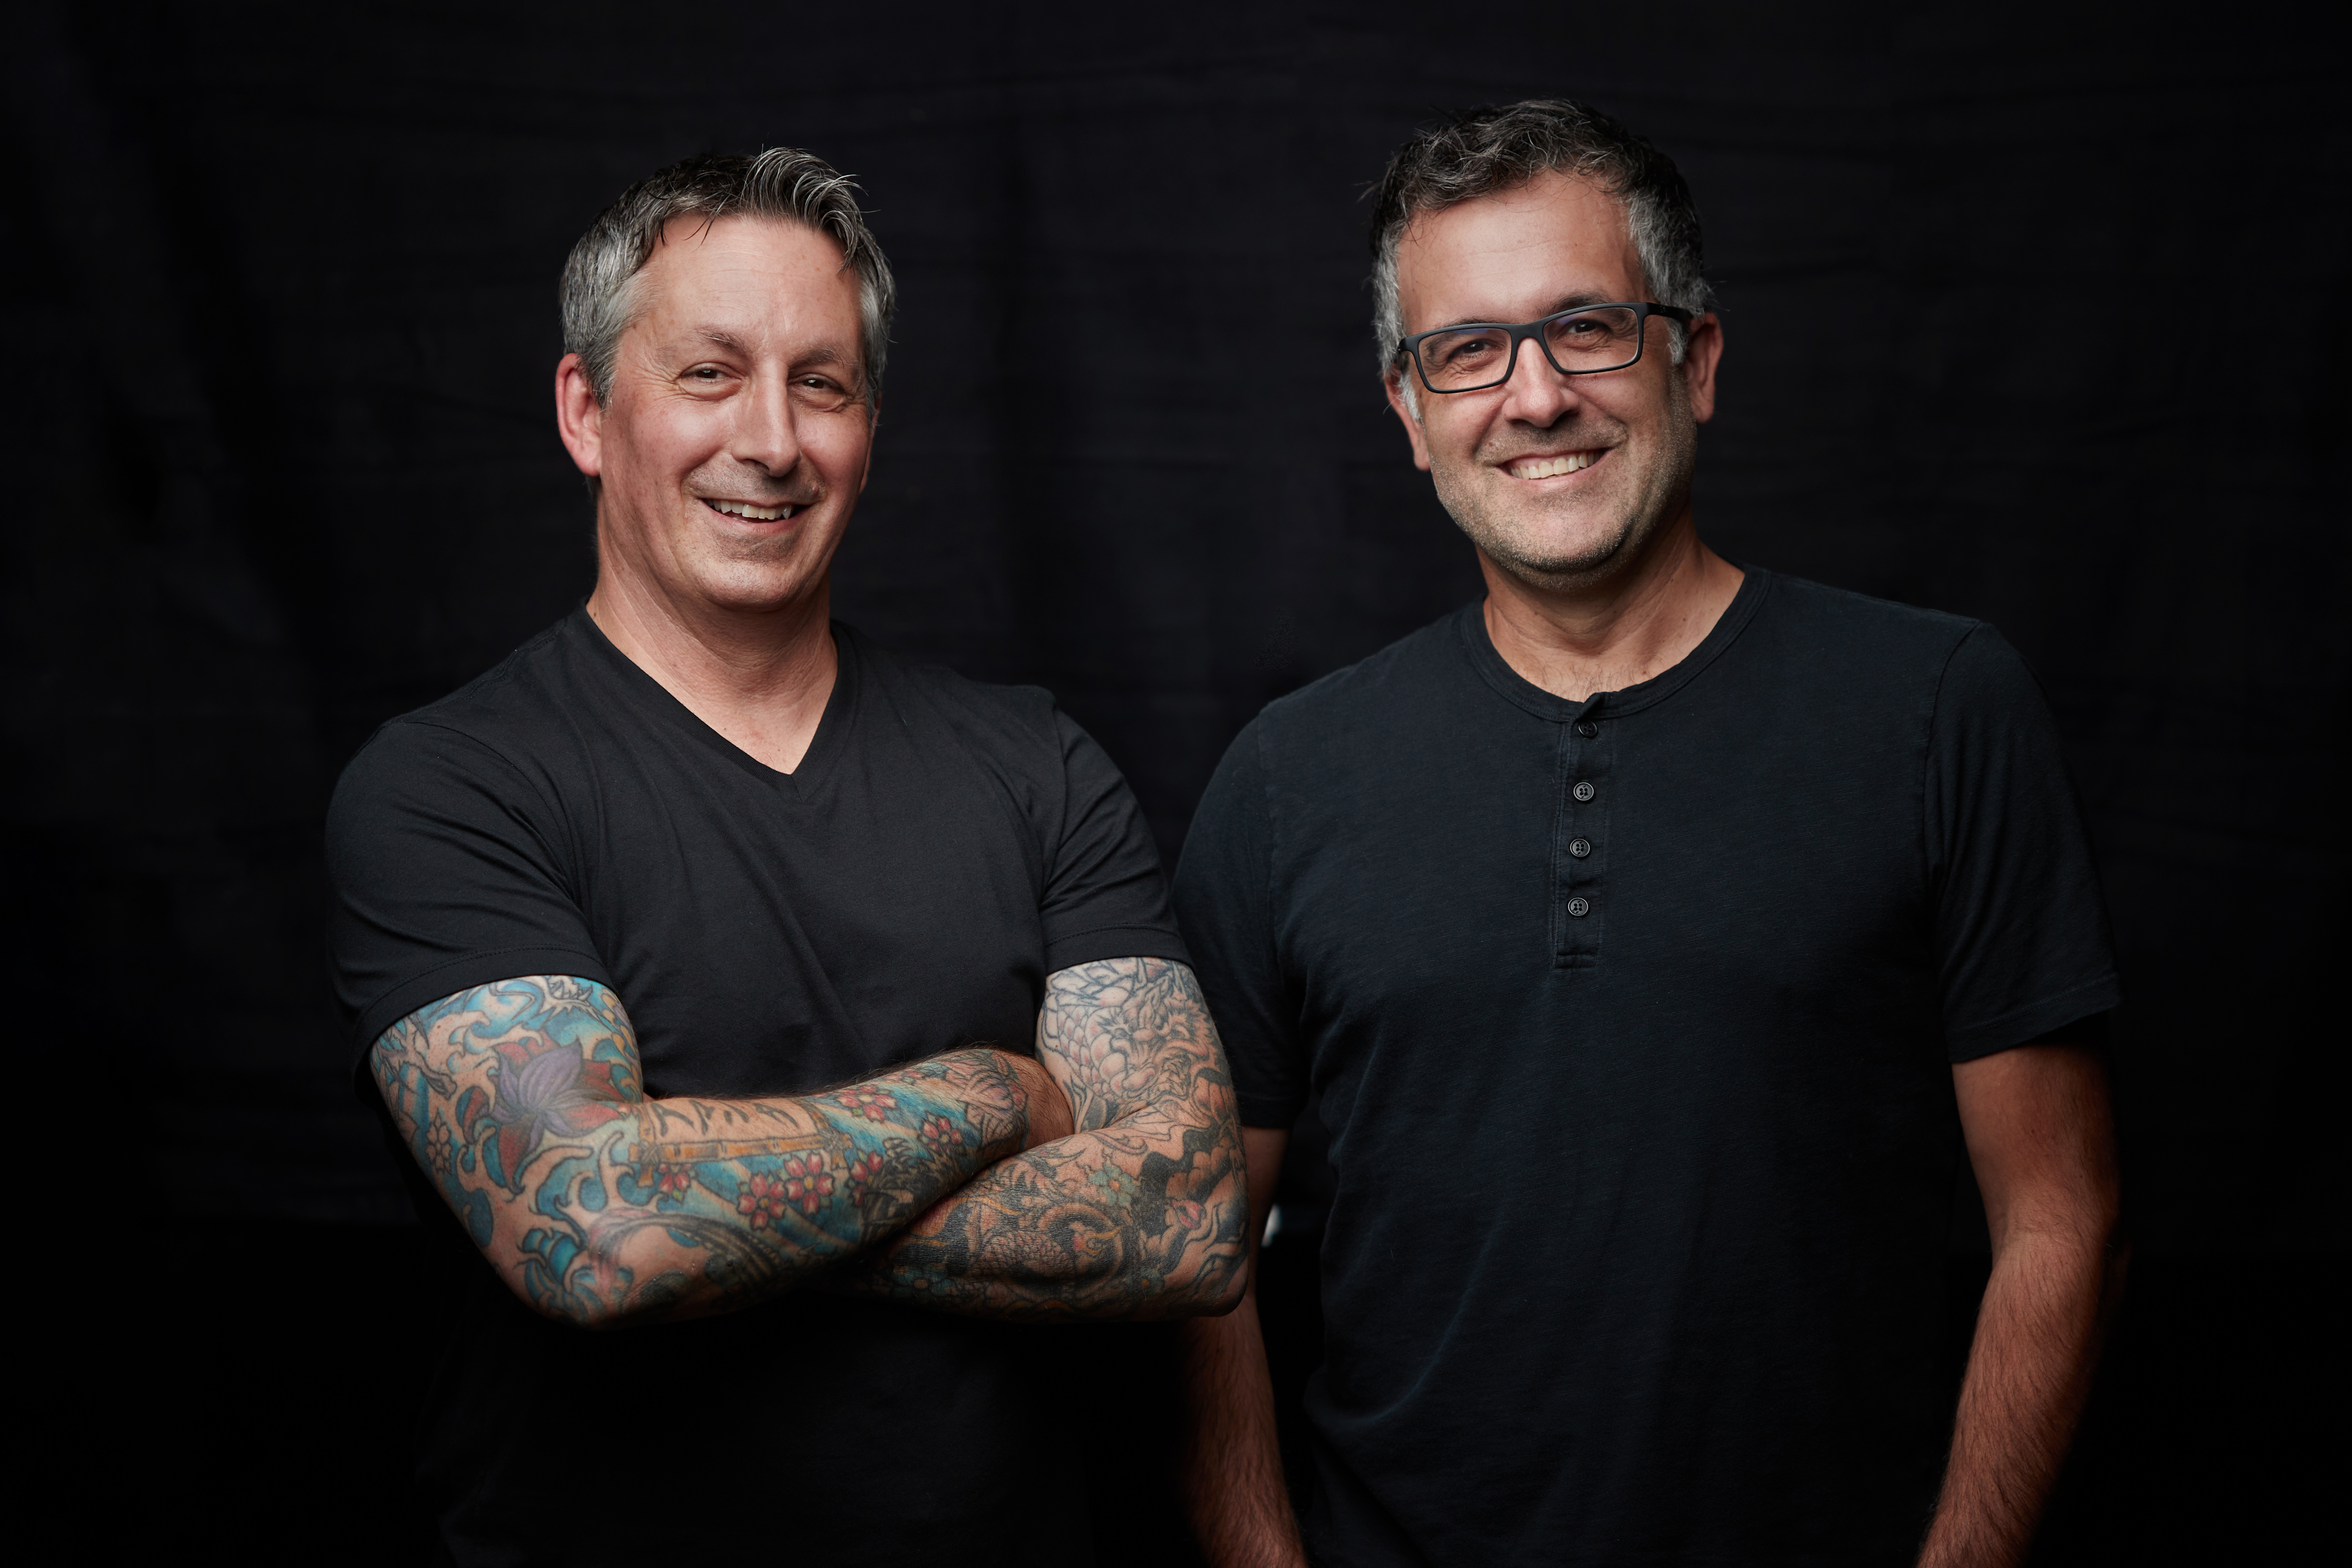 Bothers and chefs, Chad and Derek Sarno co-founded Wicked Kitchen to offer 100% plant-based options that are full of flavor.